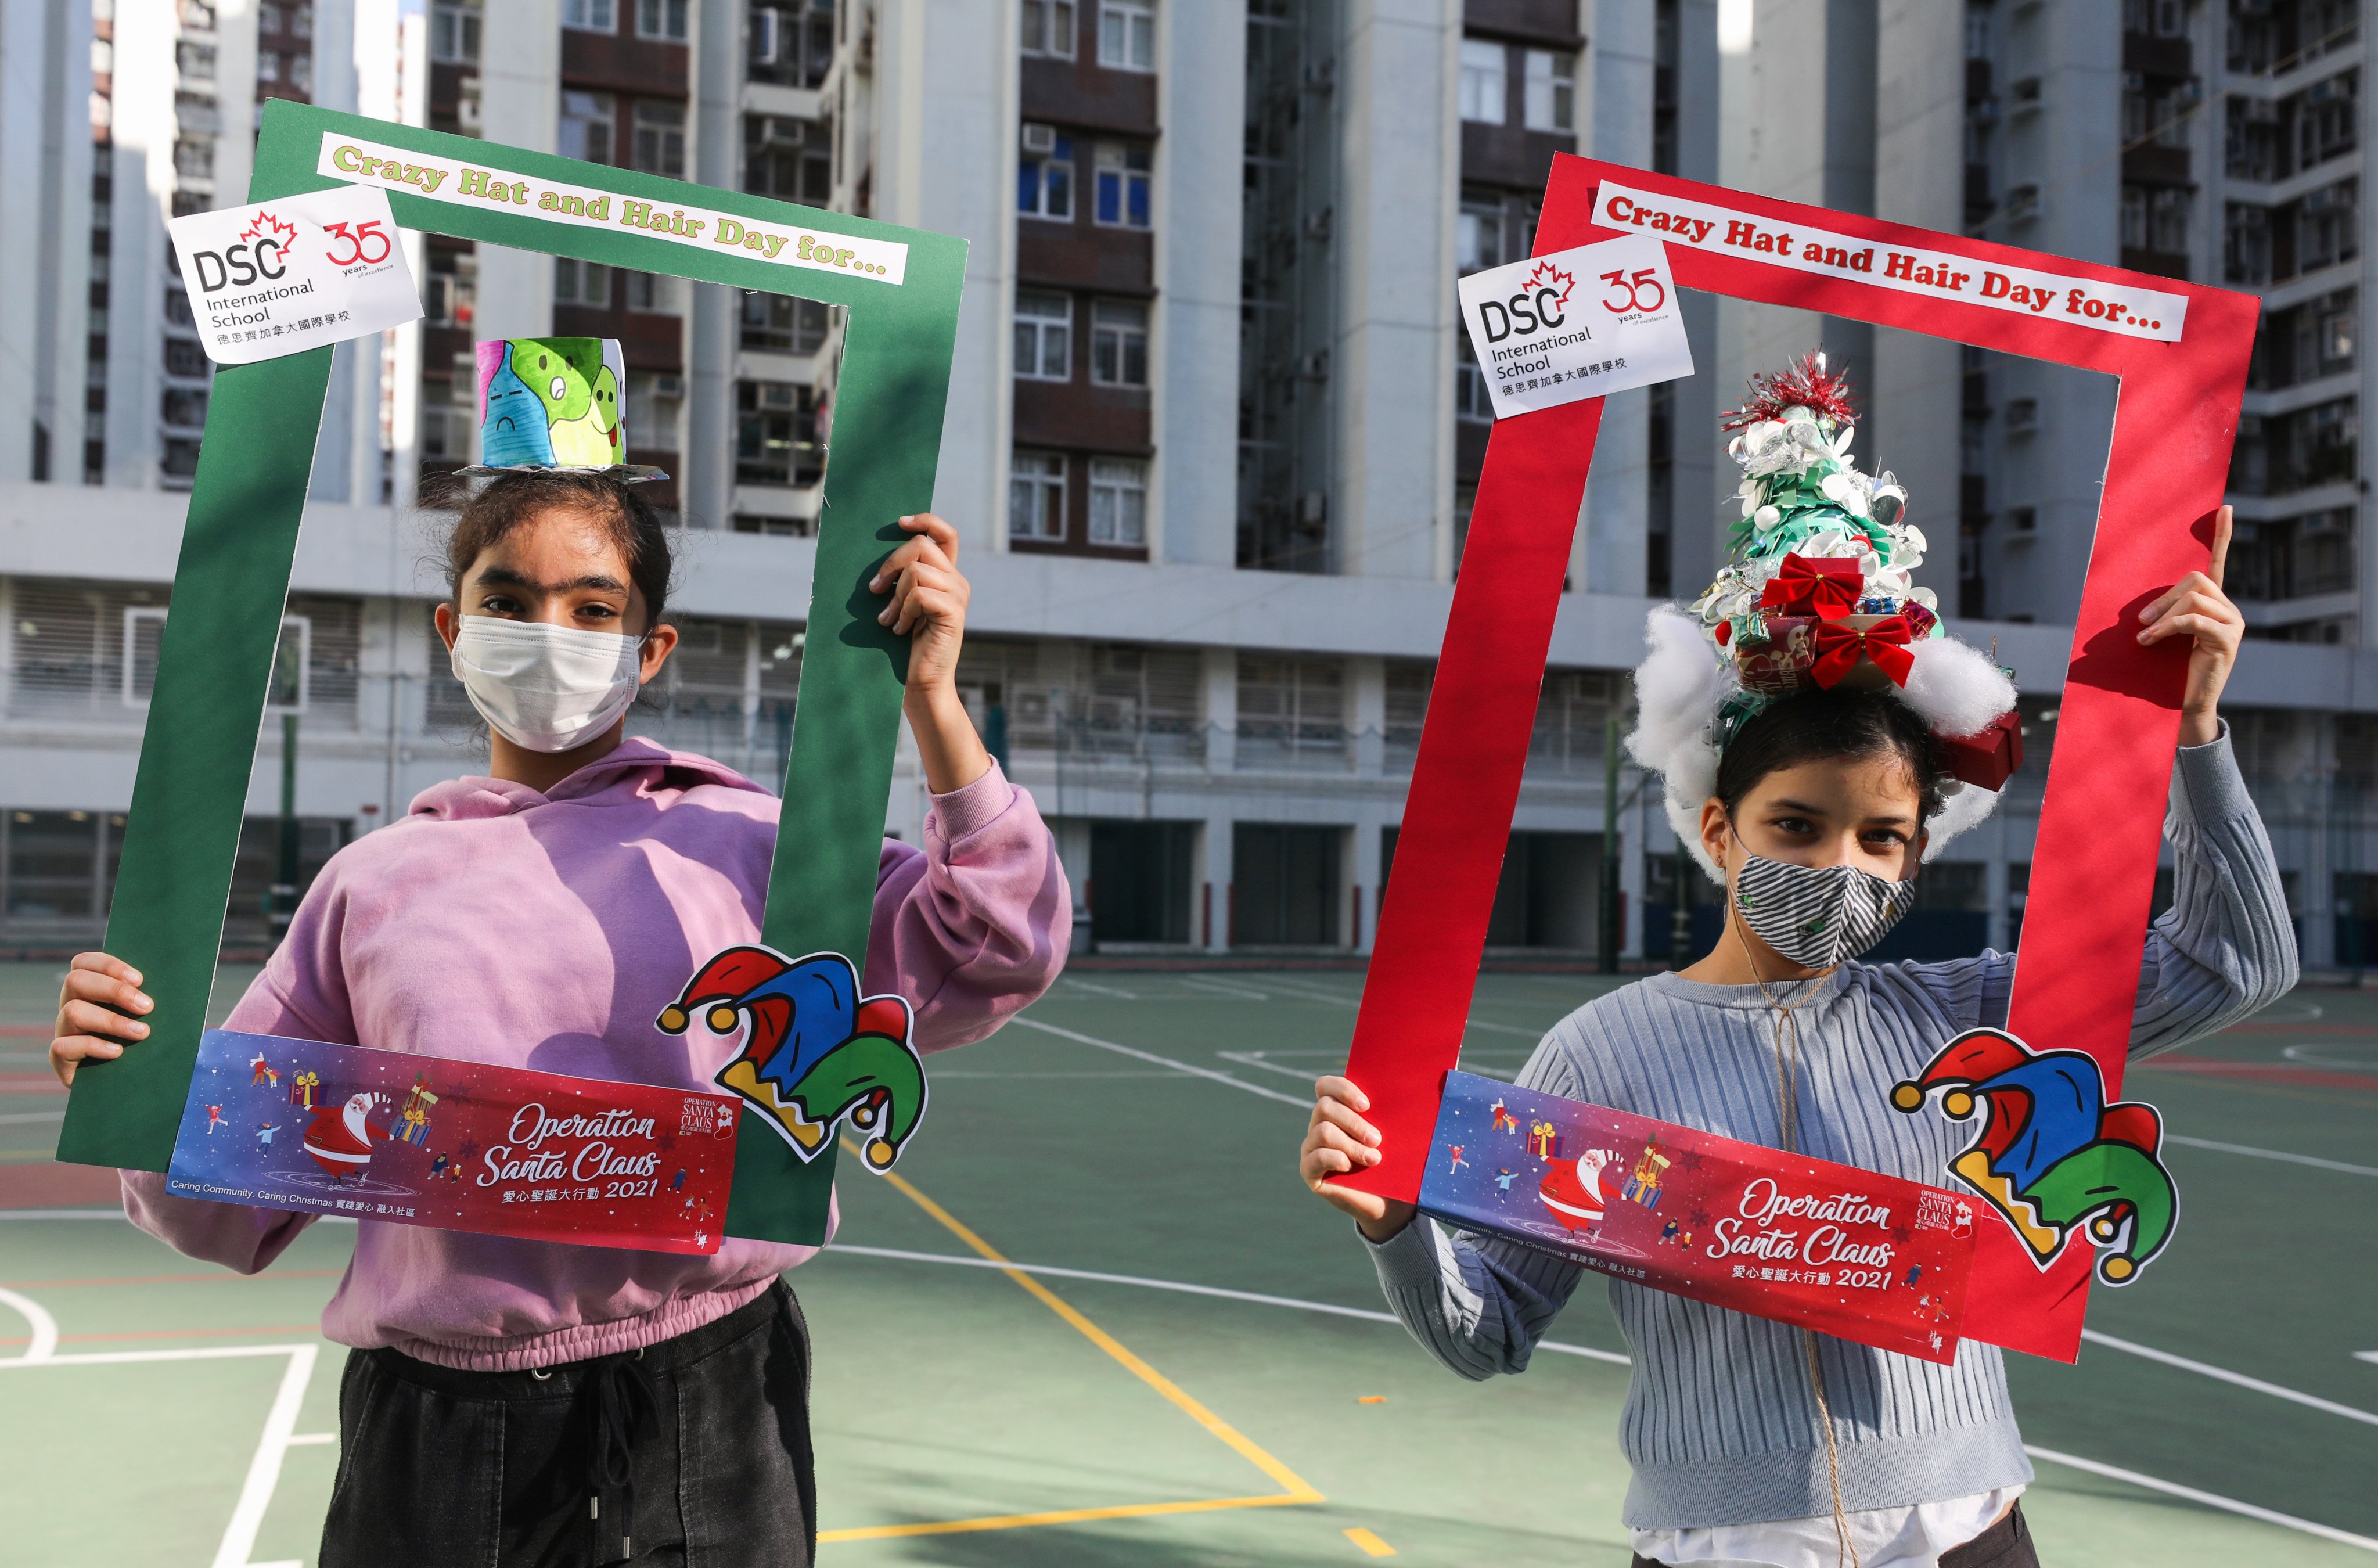 Students host Crazy Hat and Hair Day to raise money for Operation Santa Claus. Photo: Xiaomei Chen